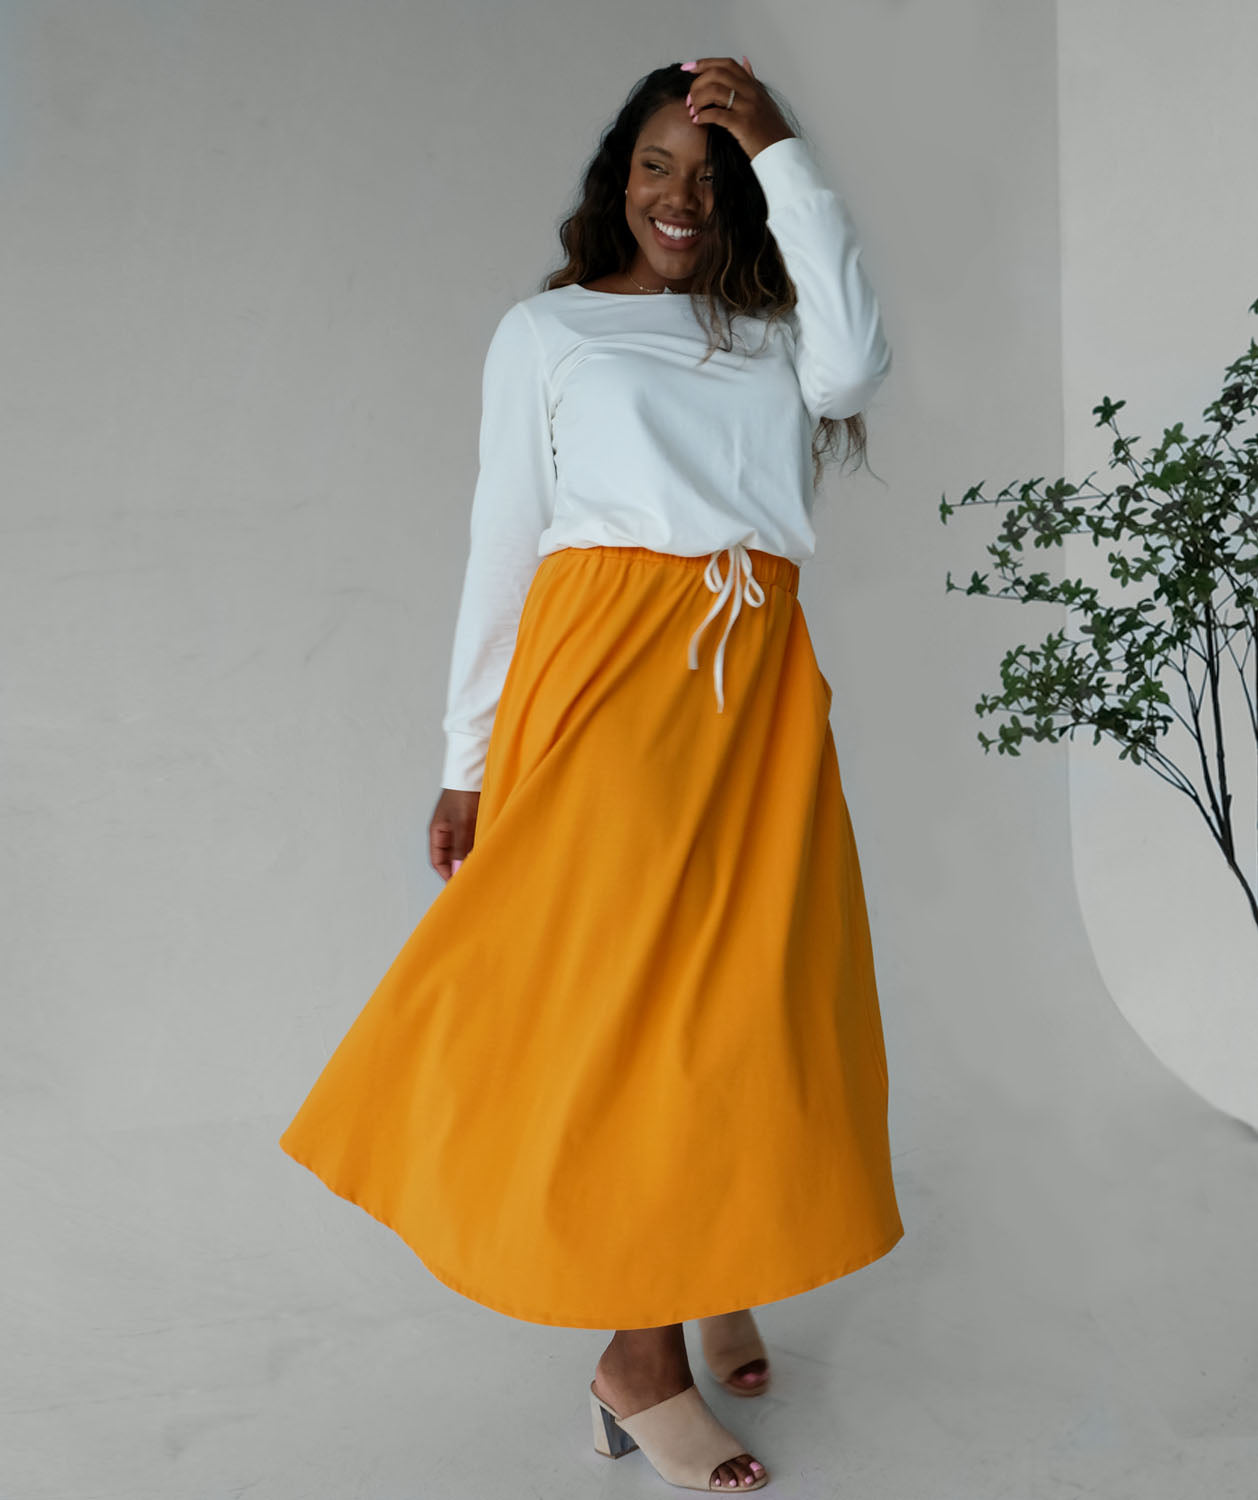 FAWN skirt in Sungold